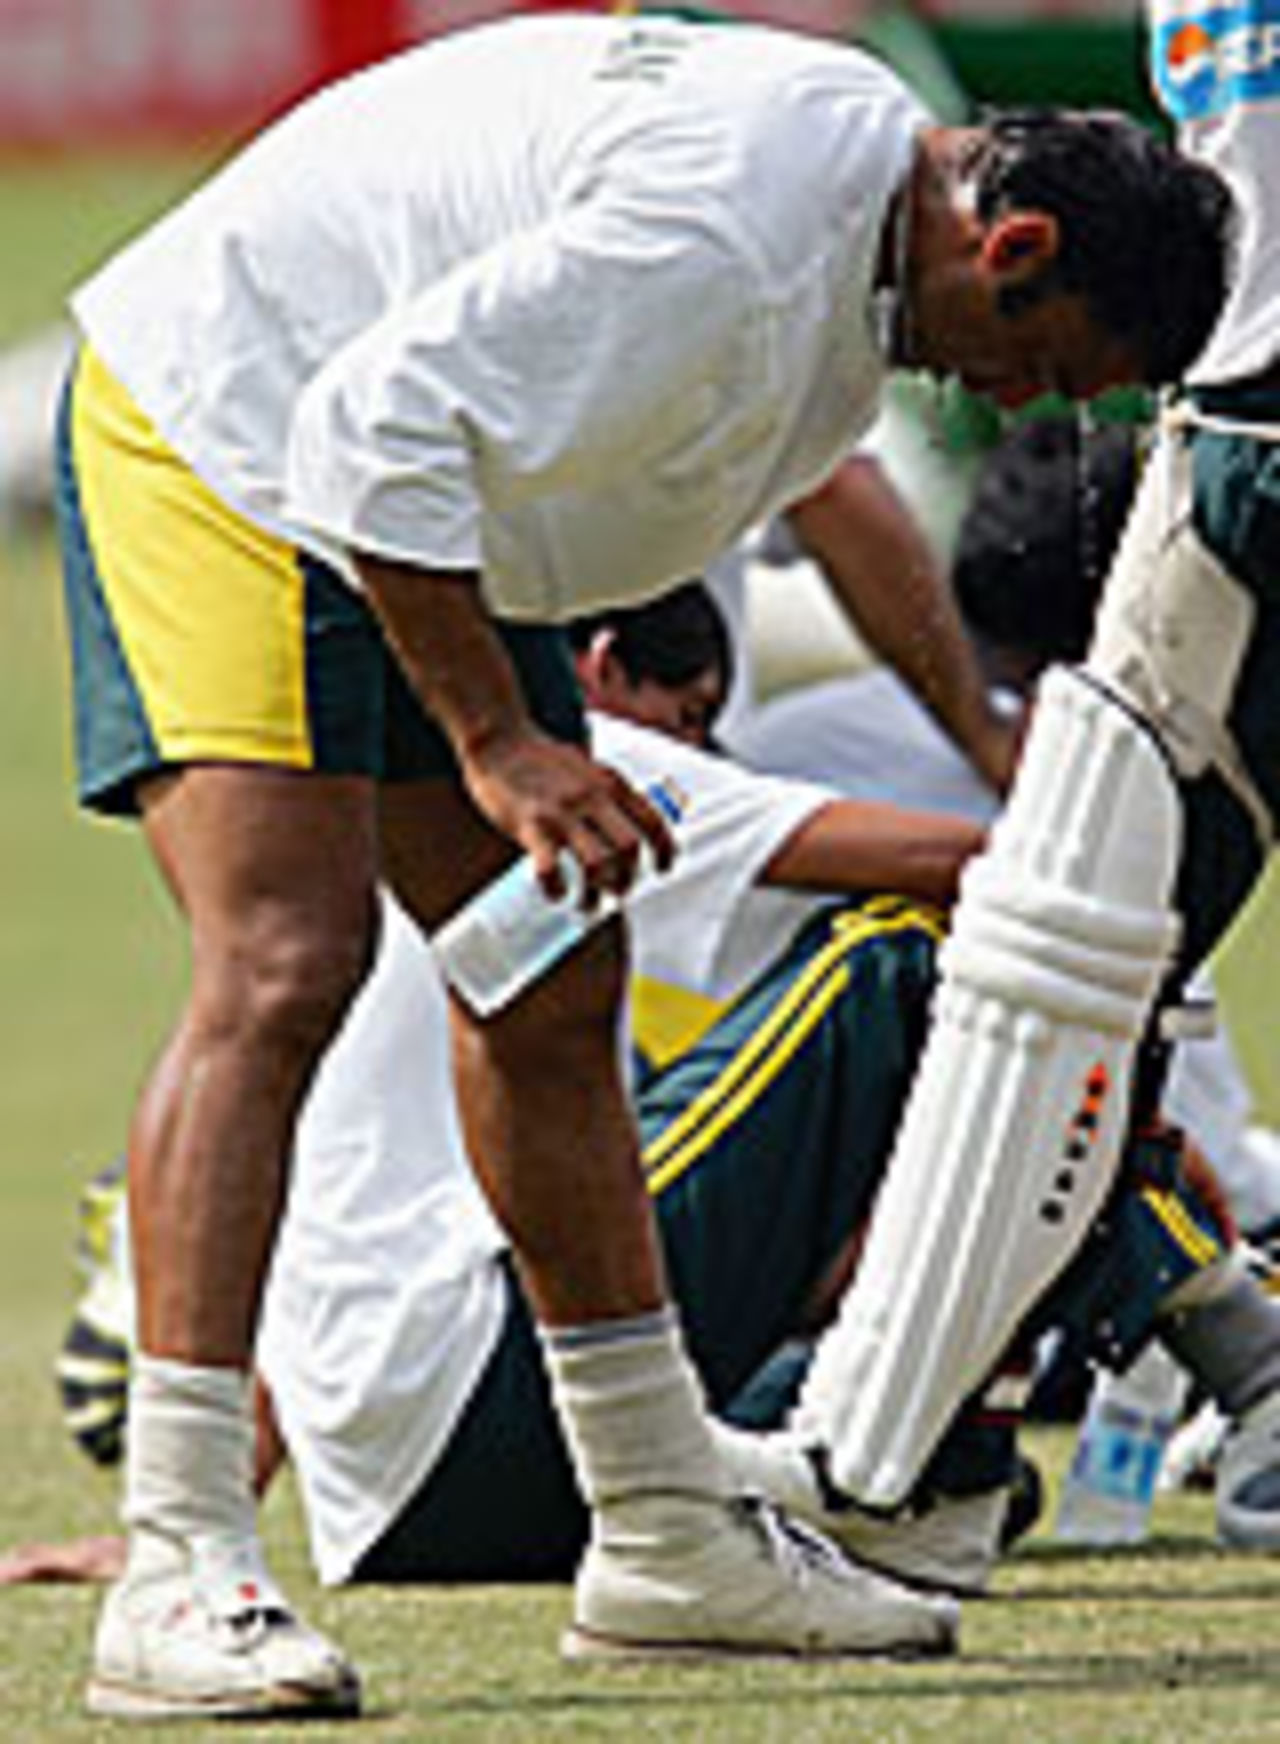 Shoaib Akhtar cools off after a training session at Melbourne, December 23 2004